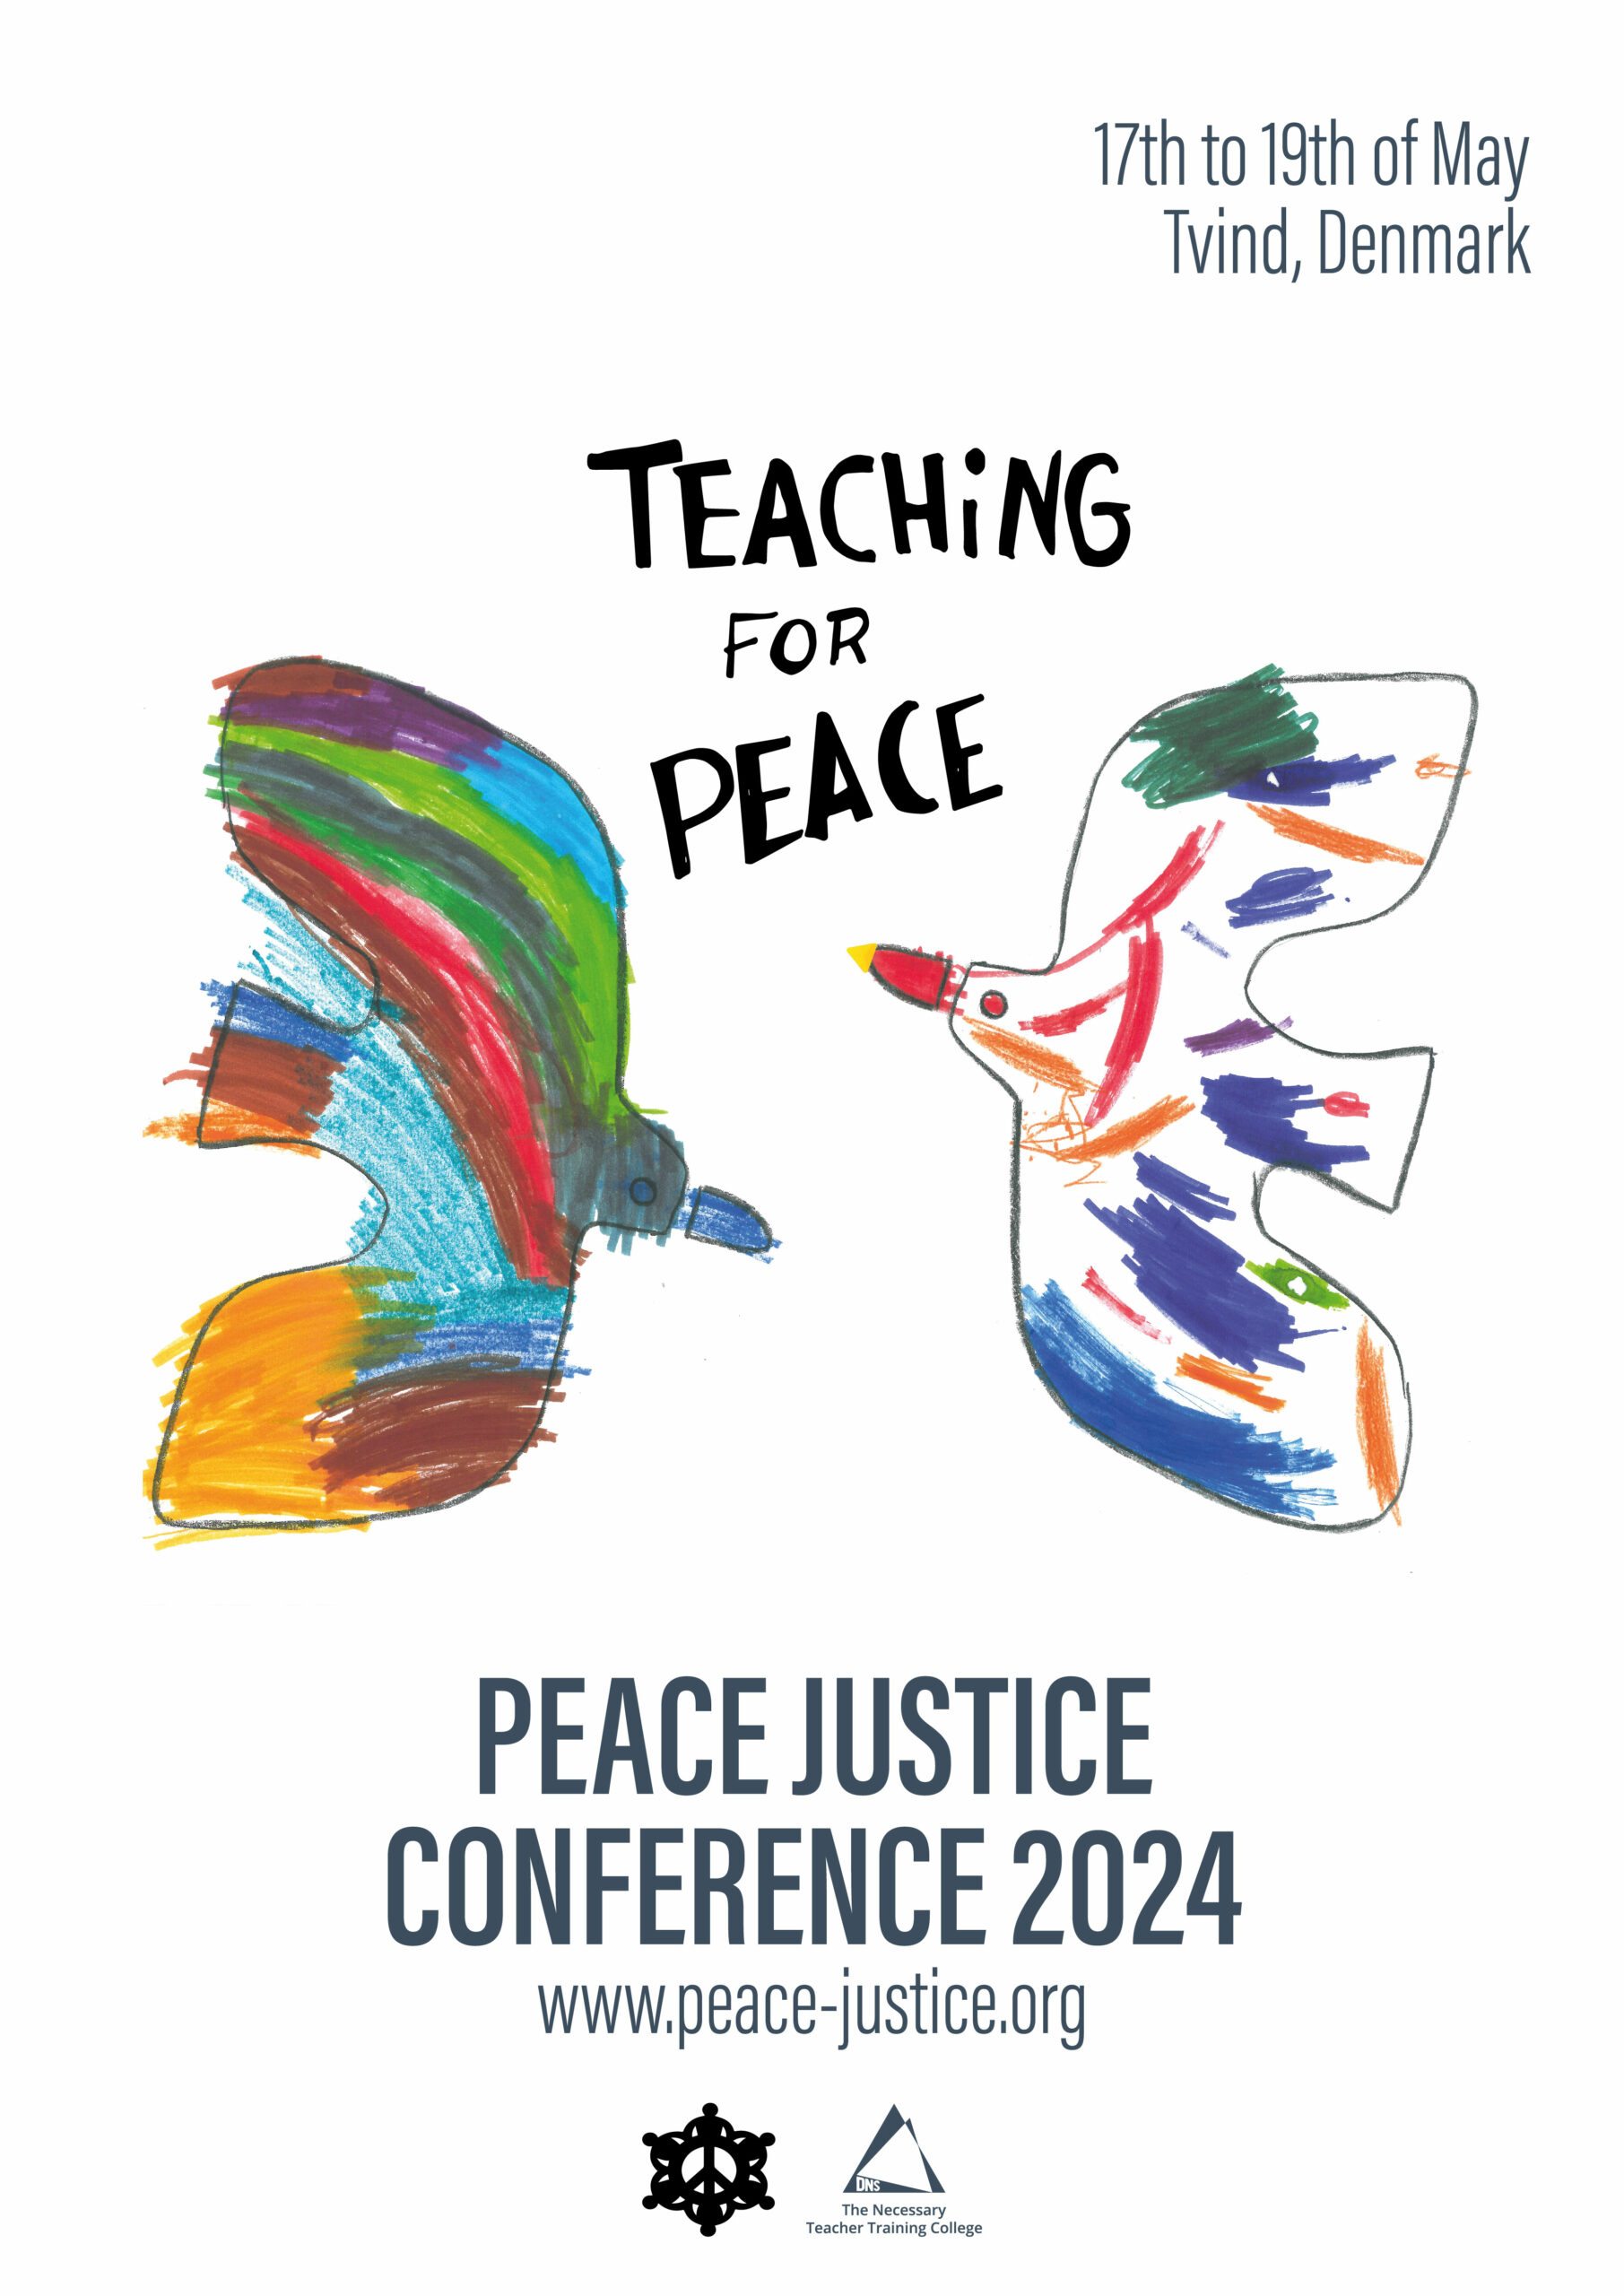 Peace Justice Conference 2024 · Tvind · Teaching for Peace